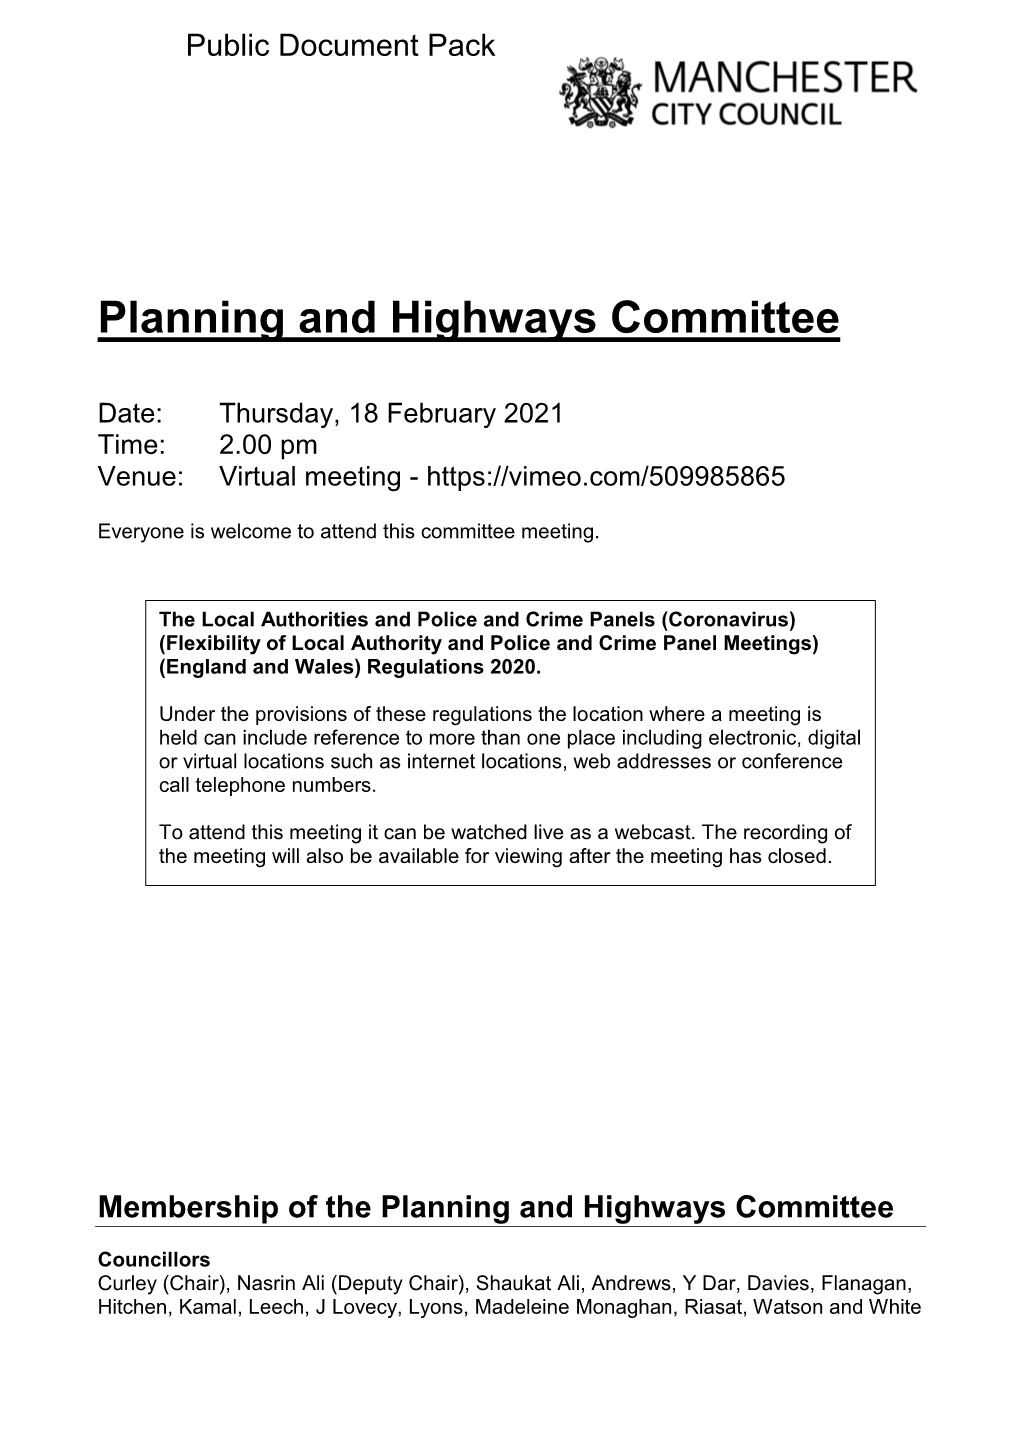 (Public Pack)Agenda Document for Planning and Highways Committee